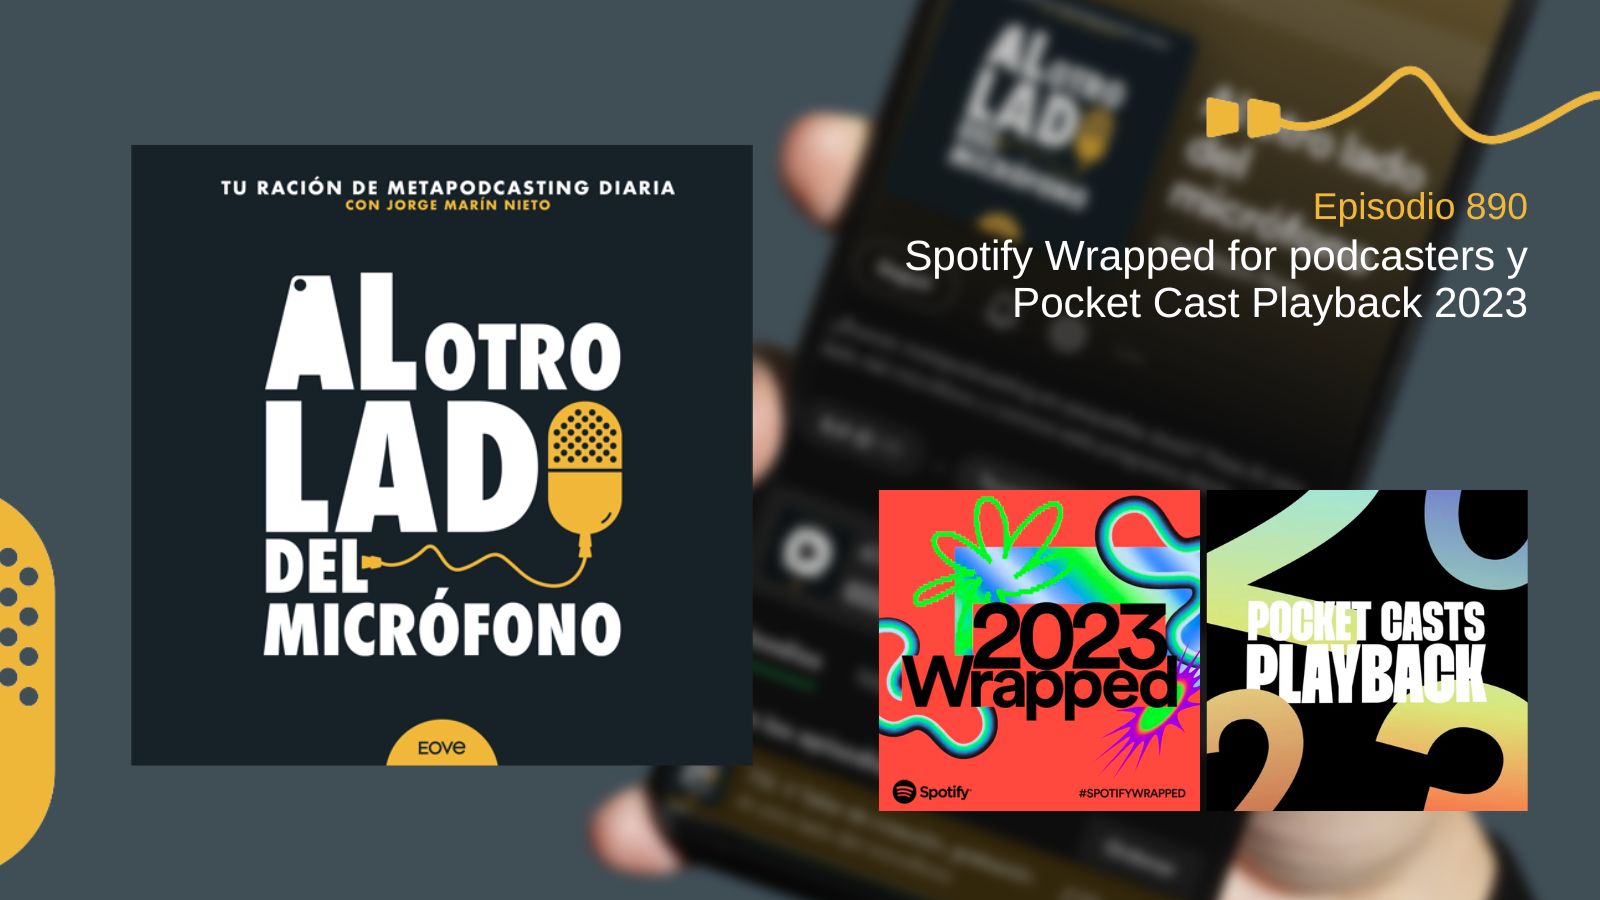 Spotify Wrapped for podcasters y Pocket Cast Playback 2023